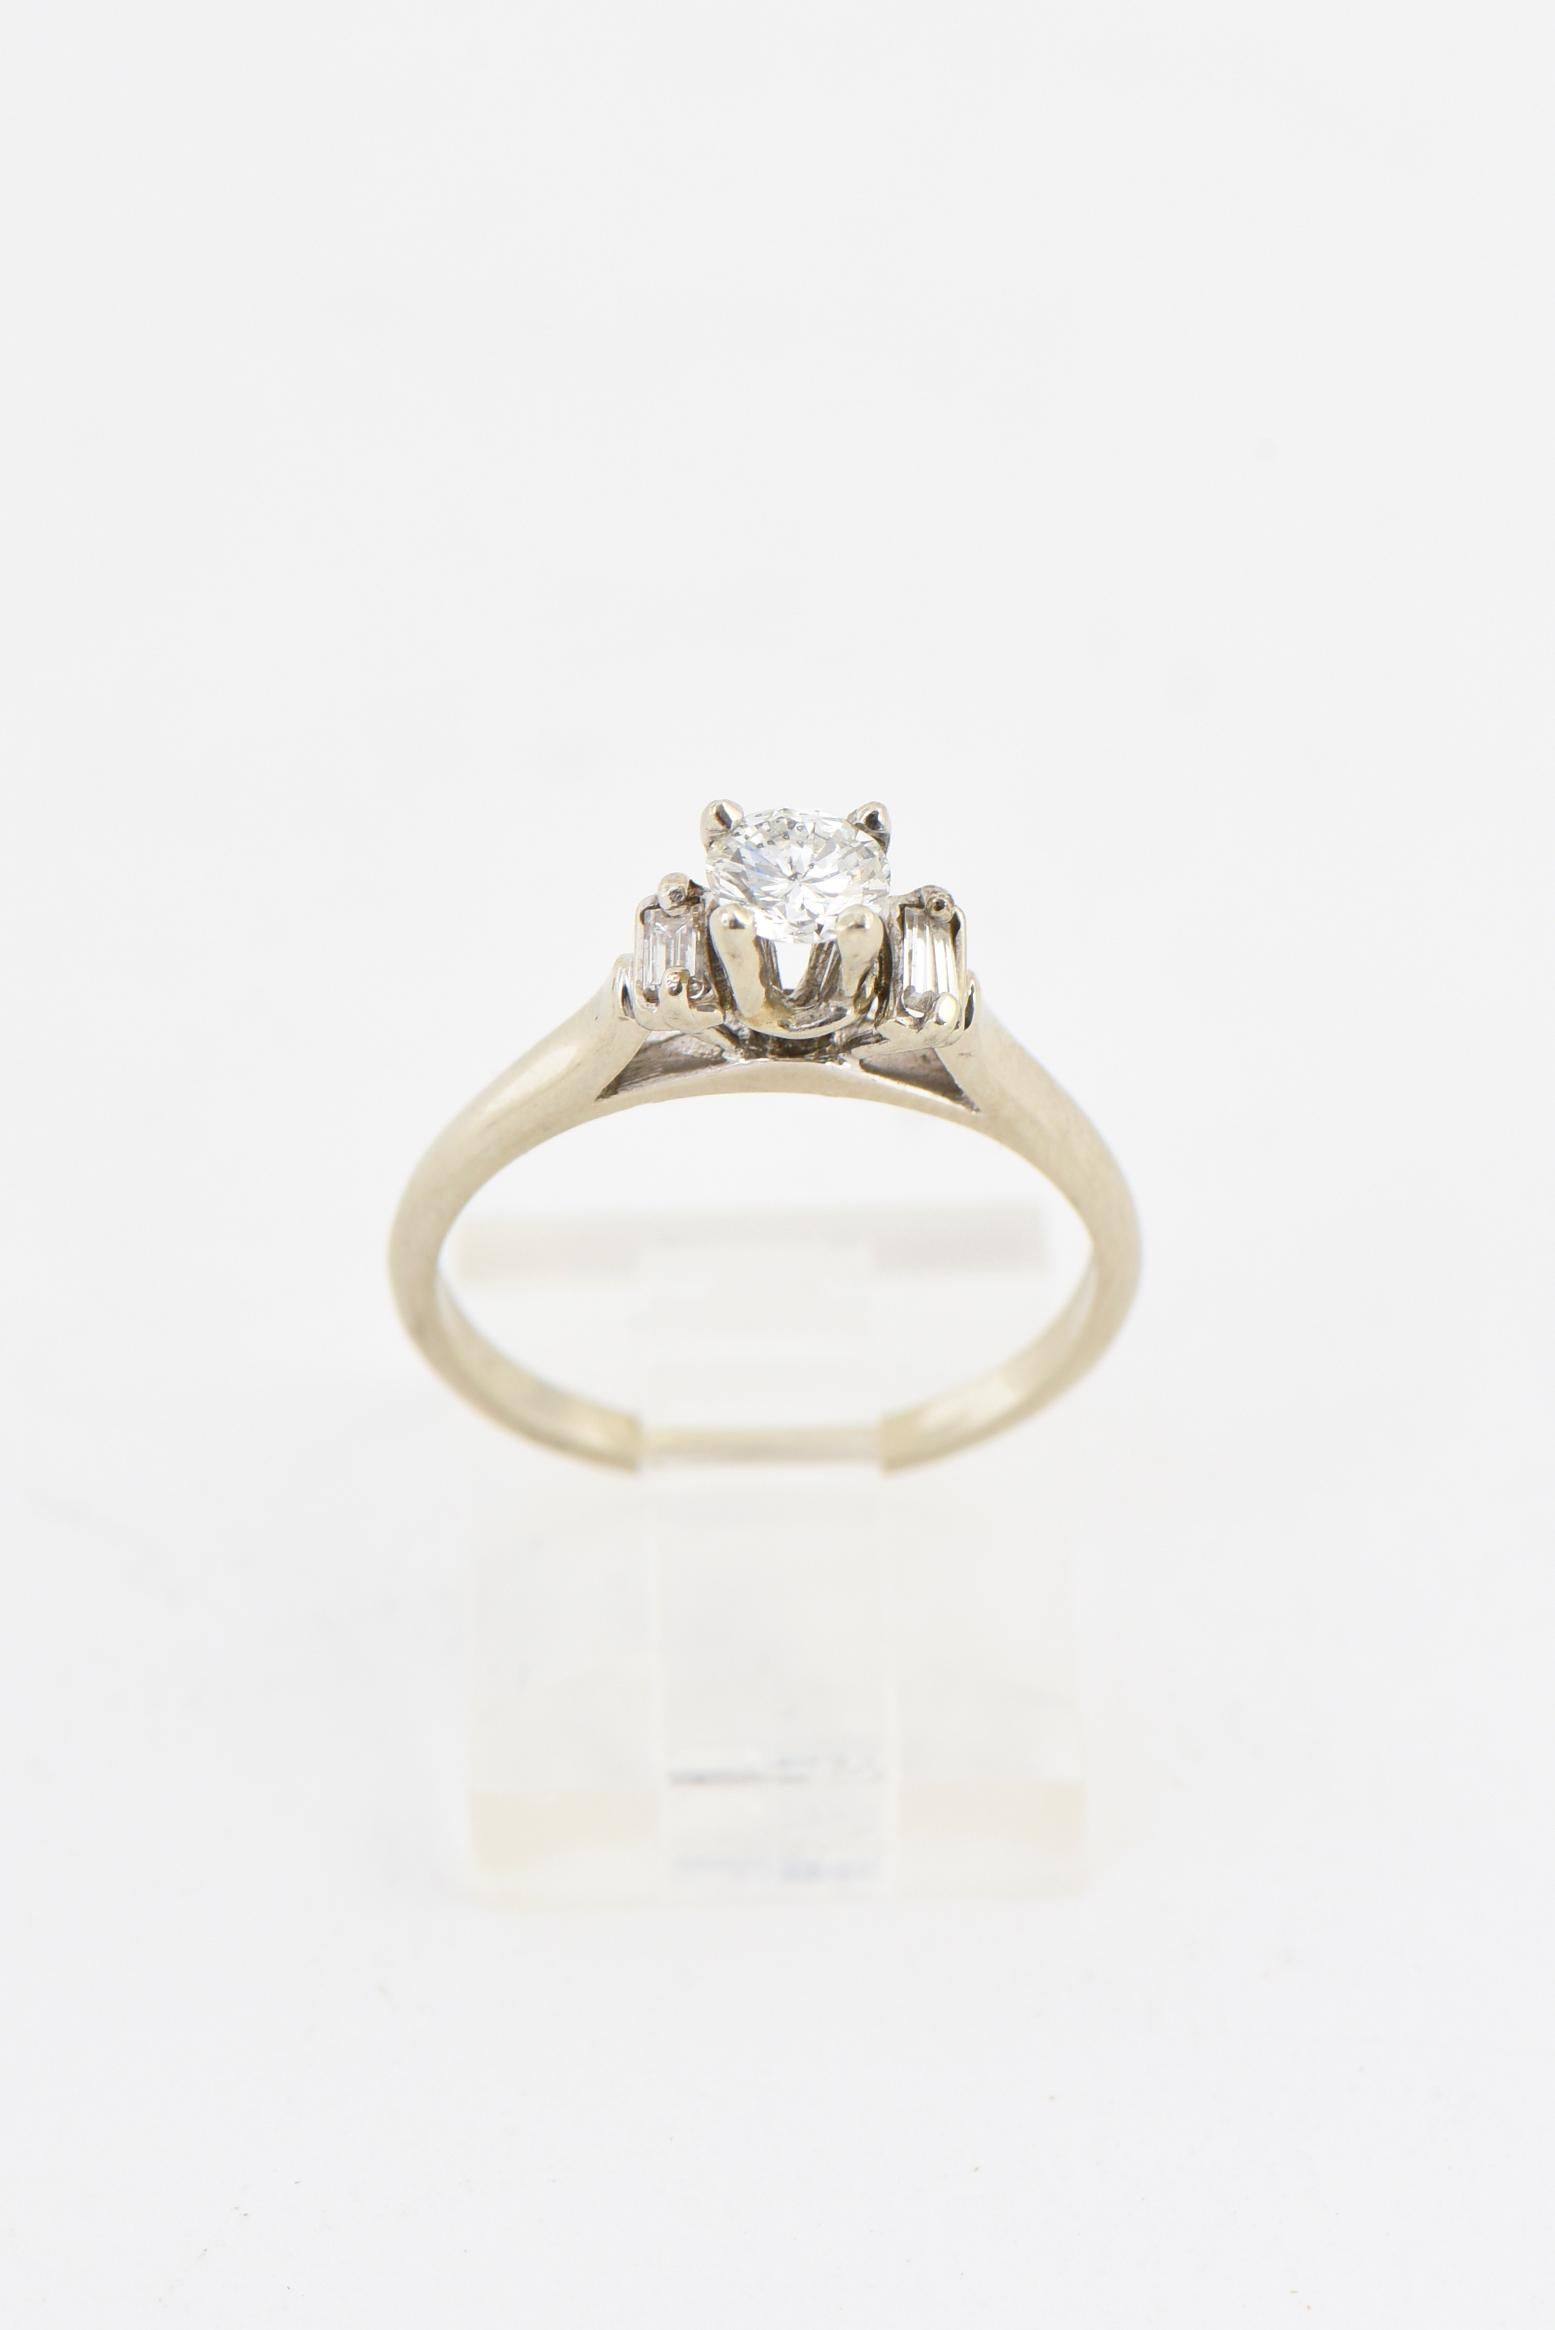 Elegant 14K white gold ring presenting a .35 carat diamond mounted in a traditional four-prong setting flanked by a baguette-cut diamond on each side. Center diamond, H-I color - SI. Age wear. US size: 6.25; can be sized. Marked: 14K.
